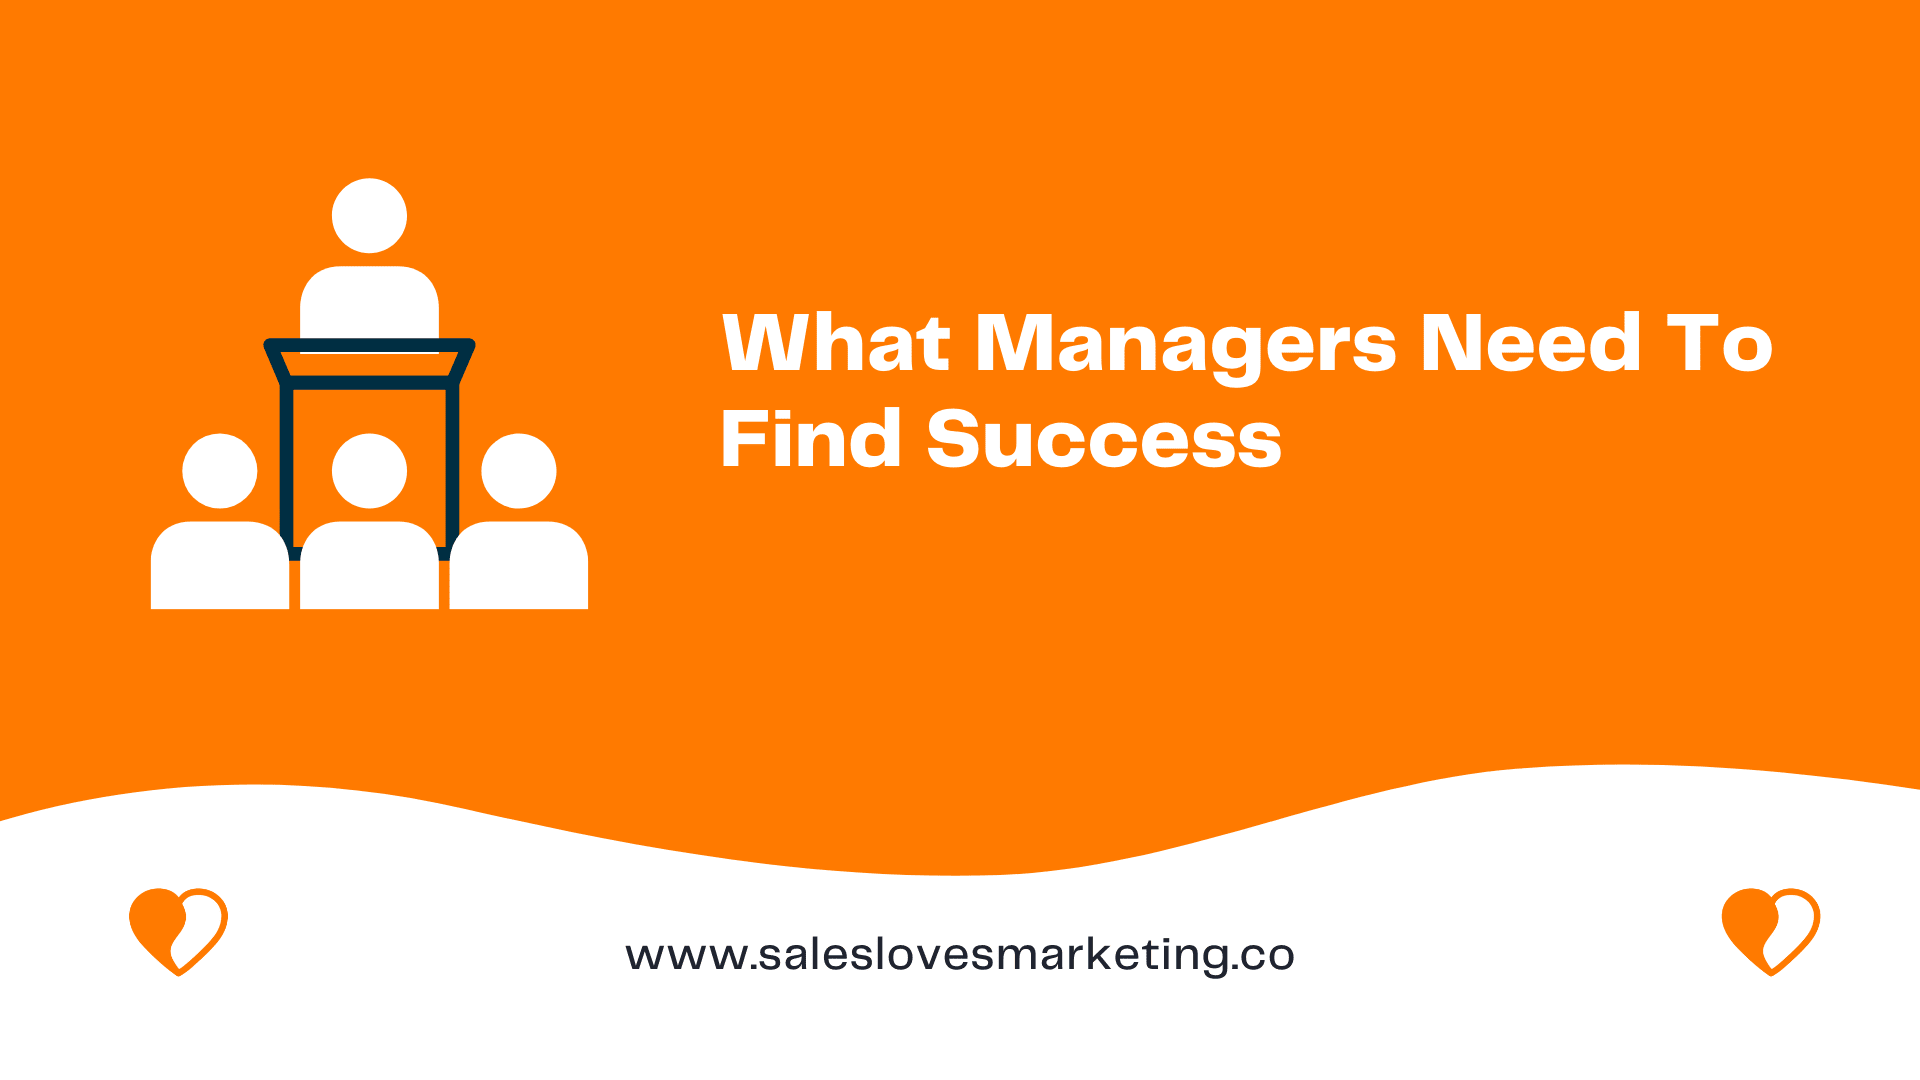 What Managers Need To Find Success